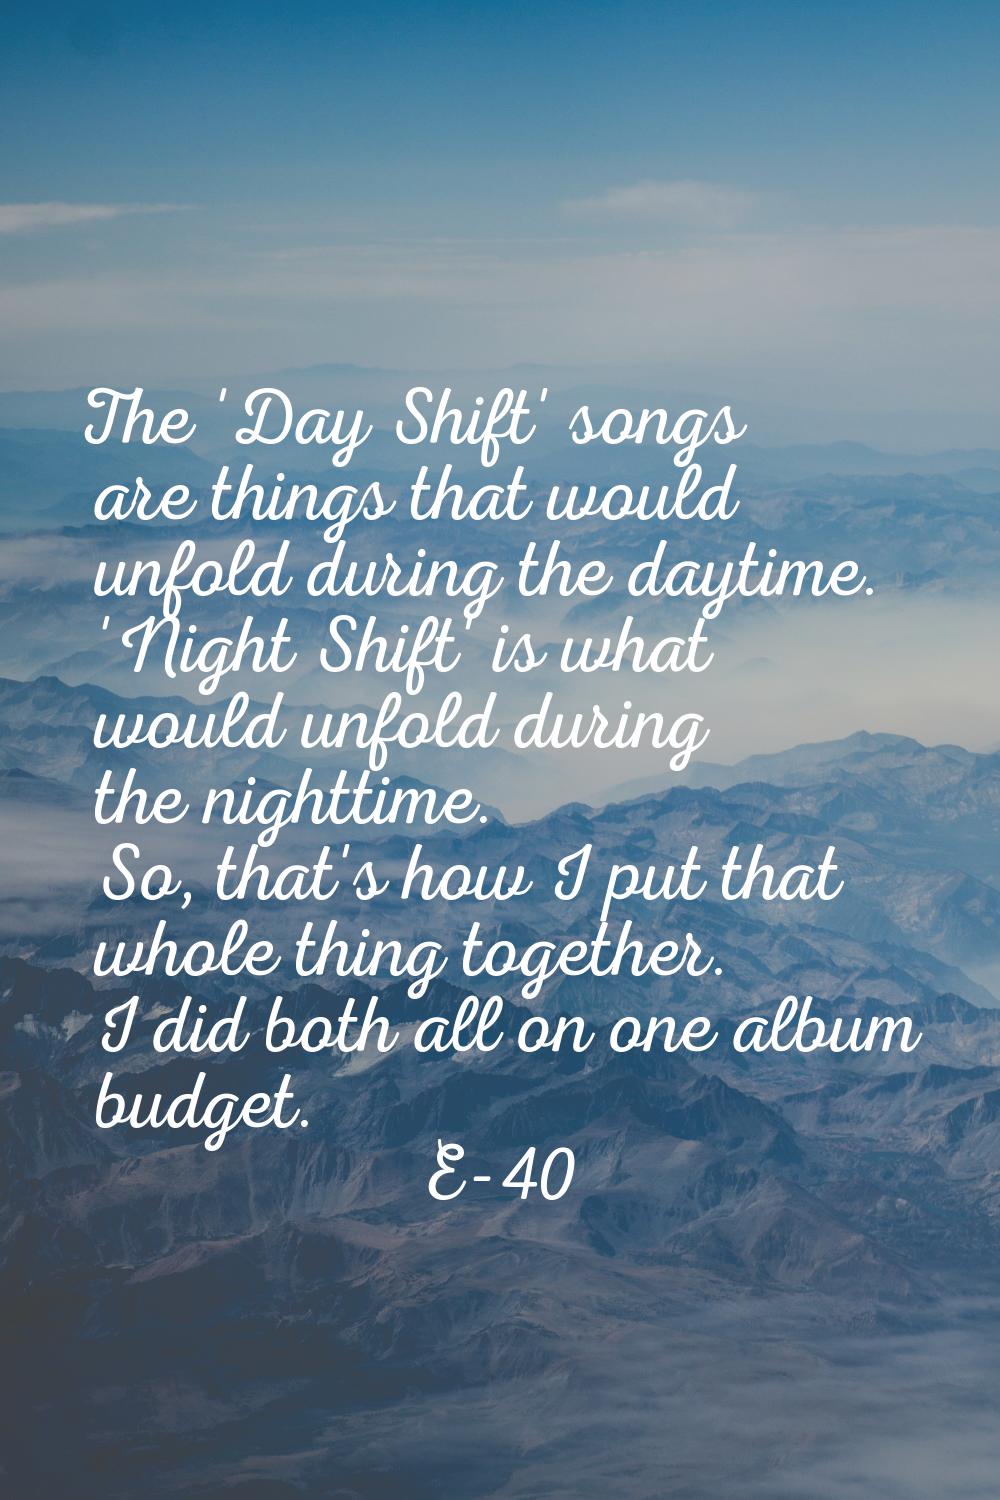 The 'Day Shift' songs are things that would unfold during the daytime. 'Night Shift' is what would 